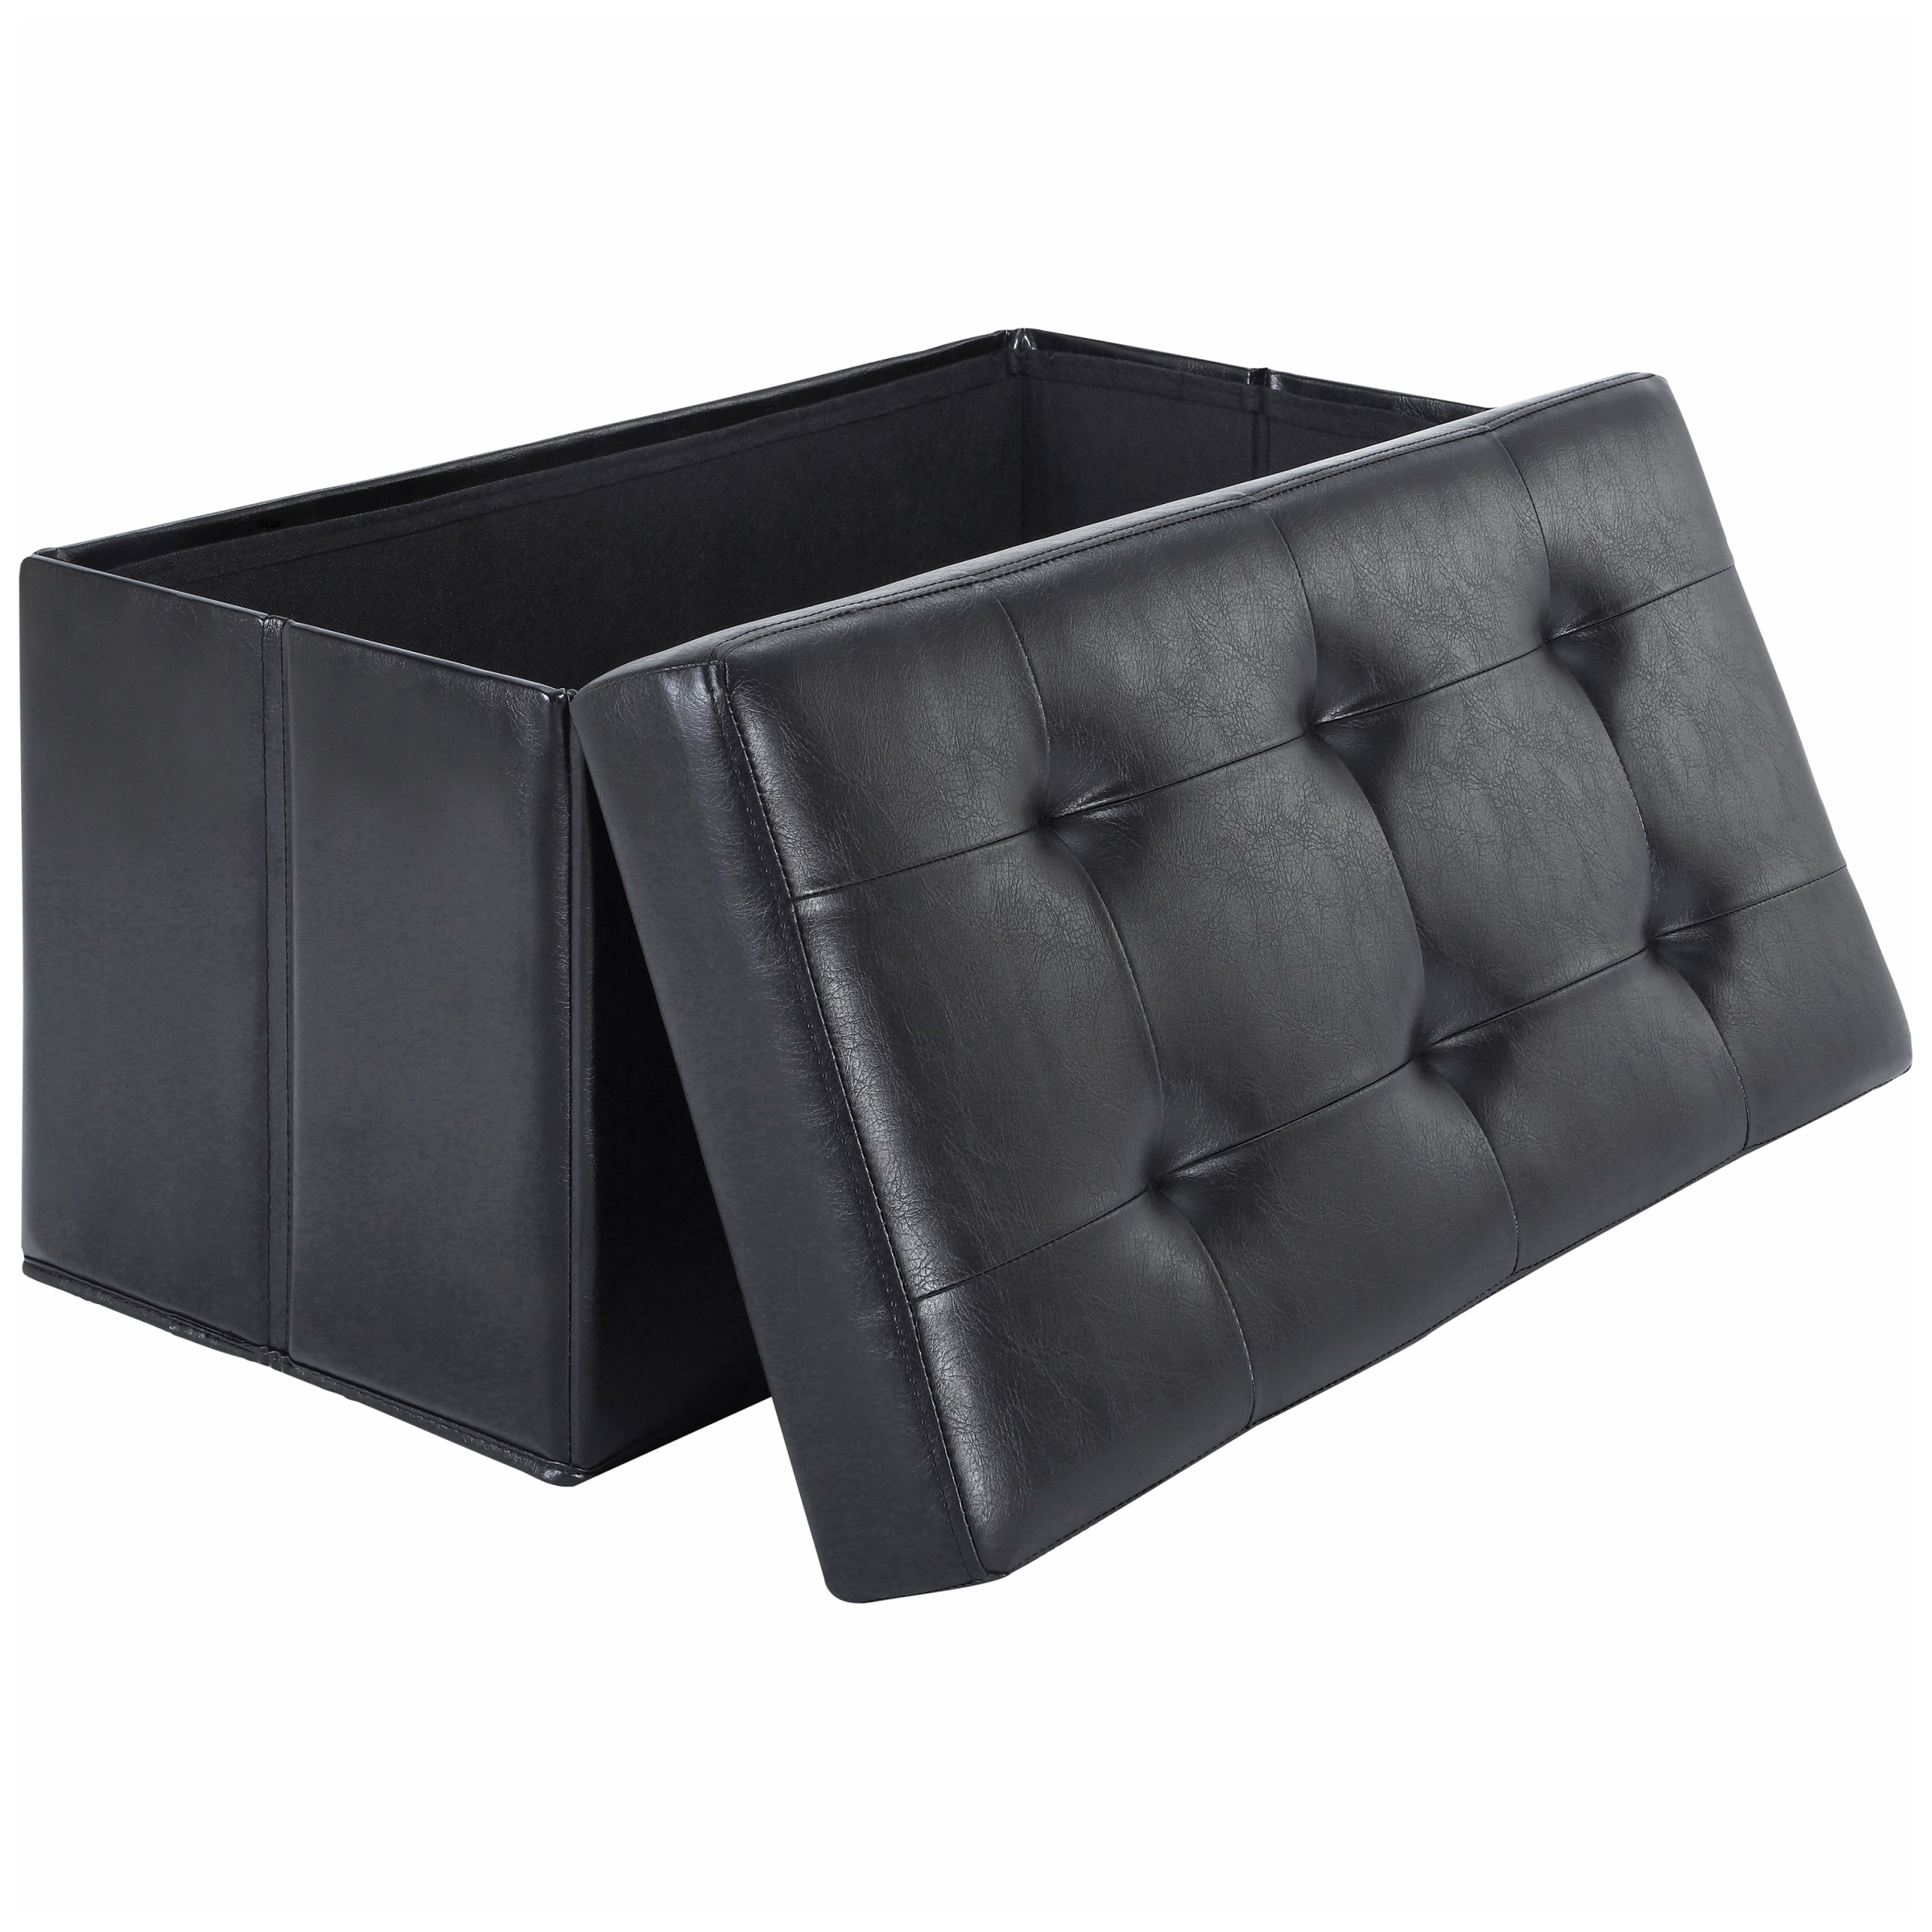 Mainstays 30-inch Collapsible Storage Ottoman, Quilted Black Faux Leather - image 4 of 6